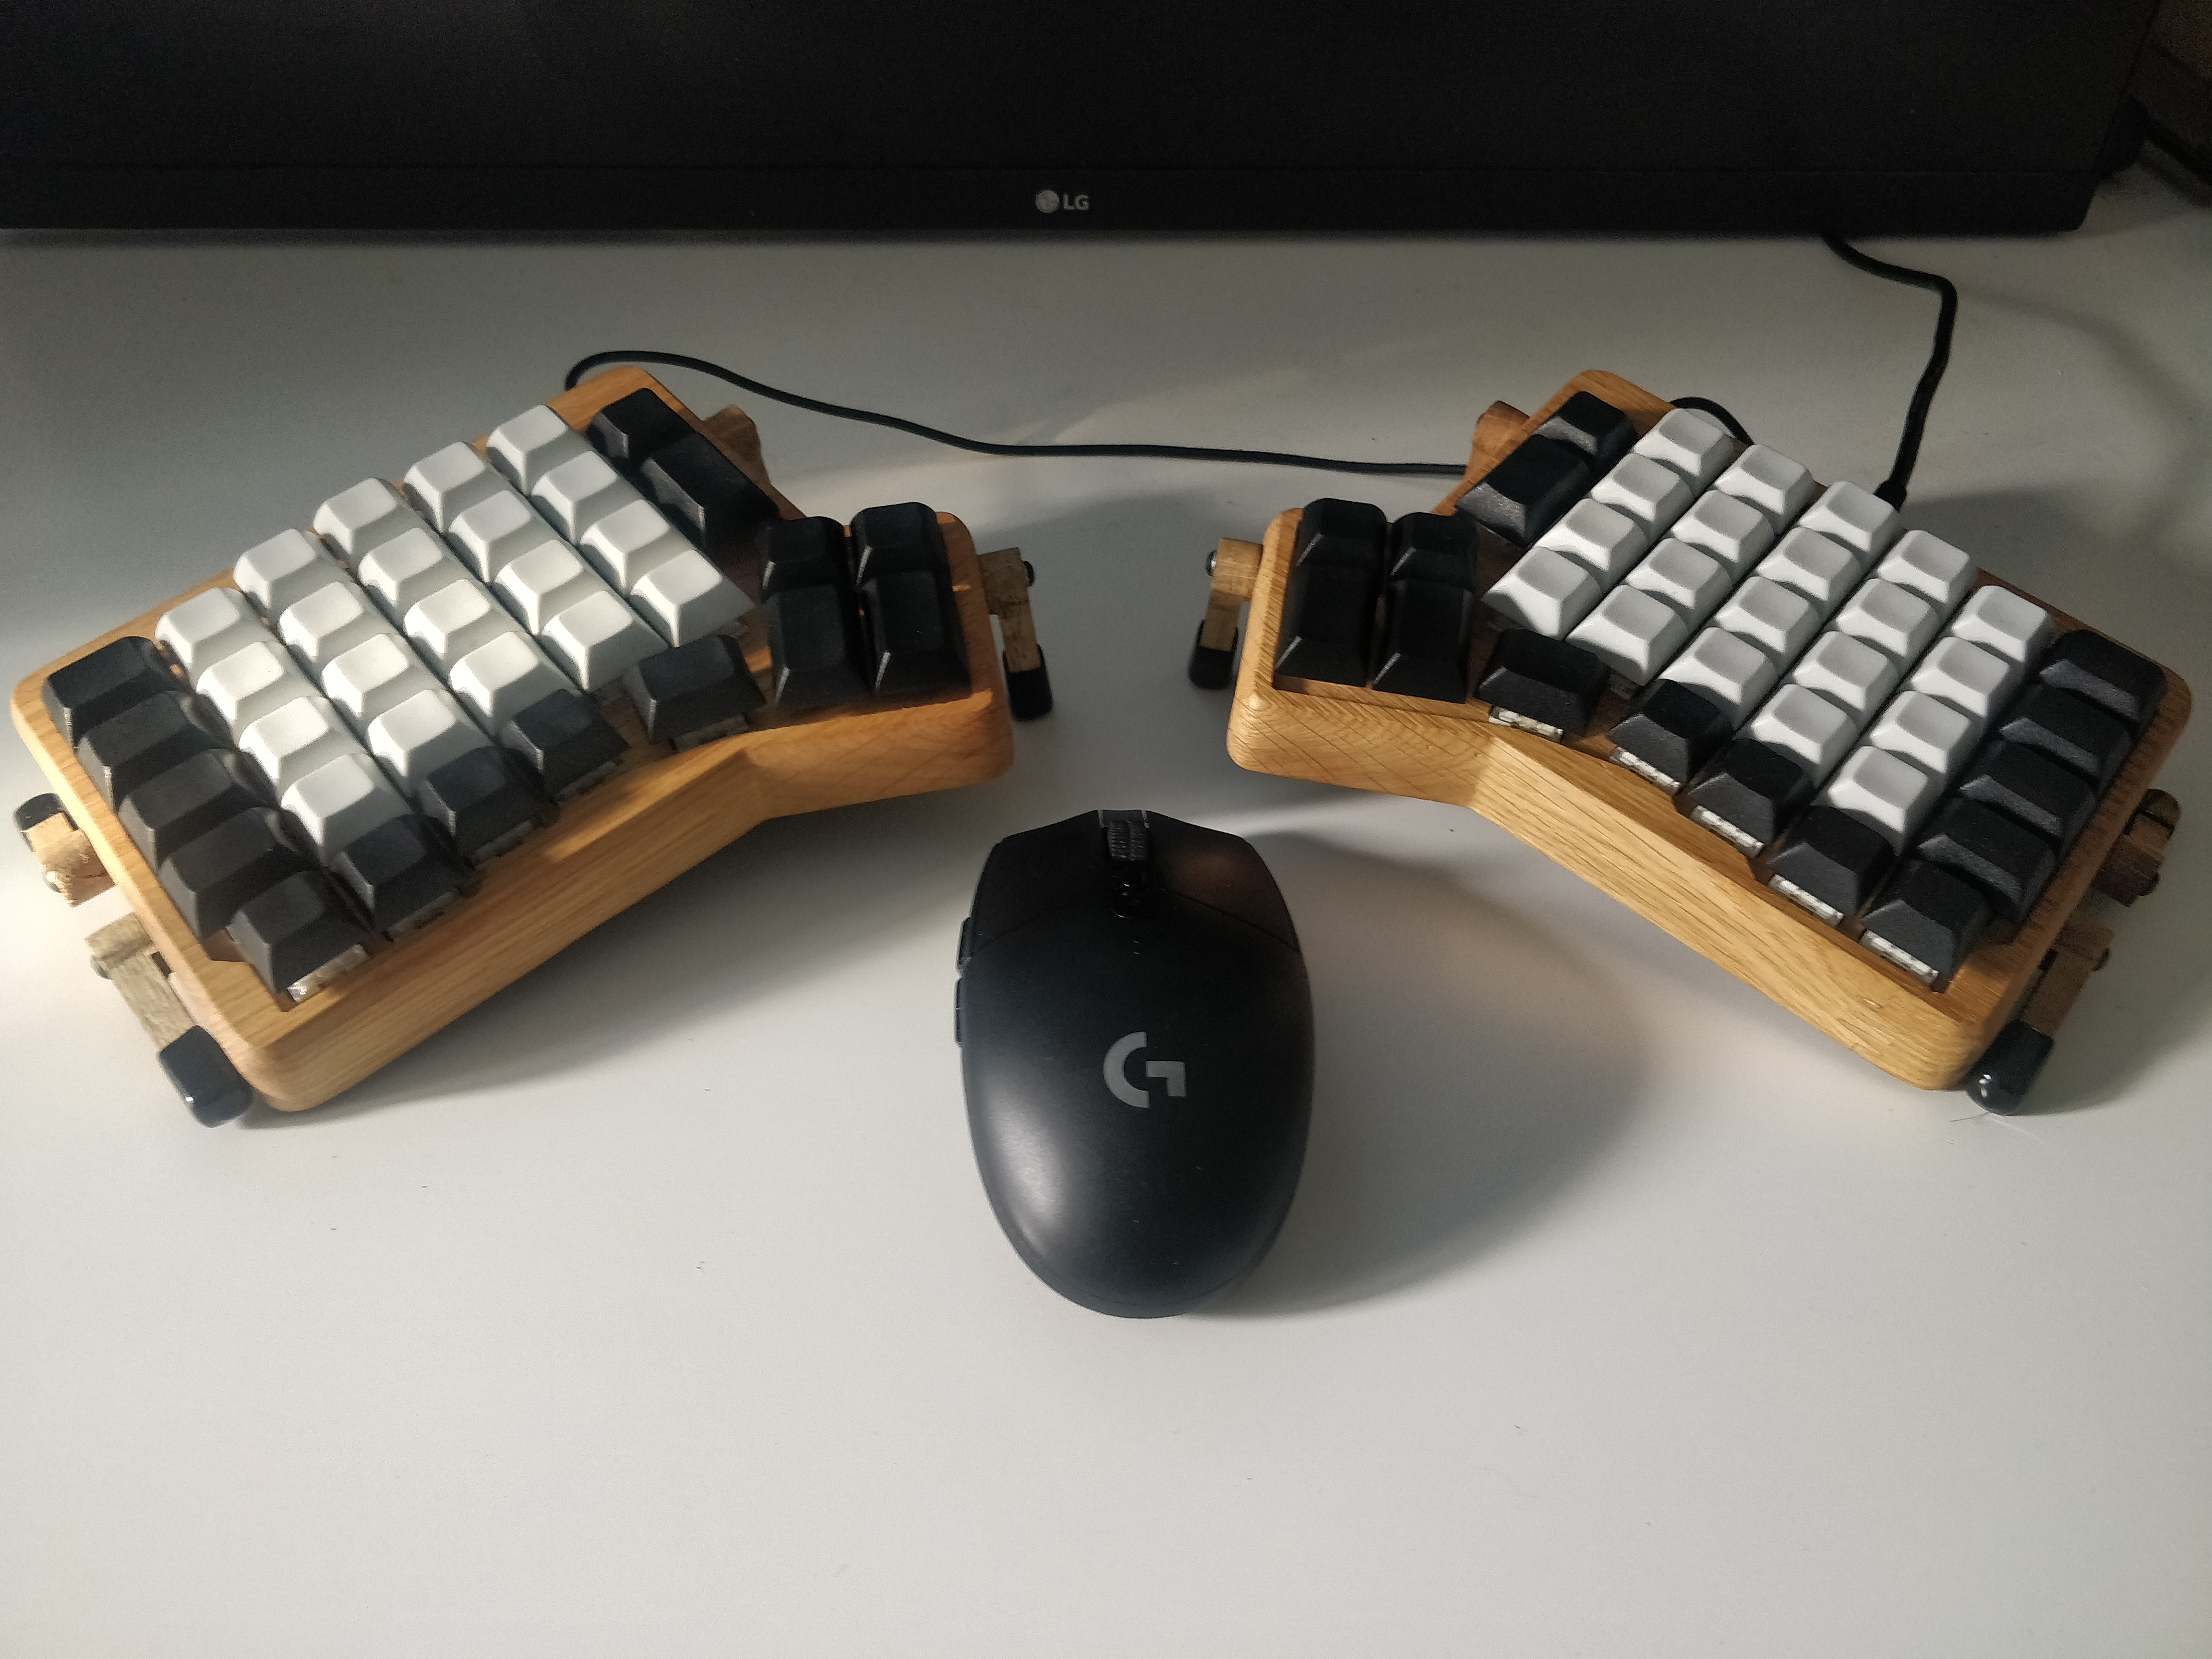 My completed Redox keyboard